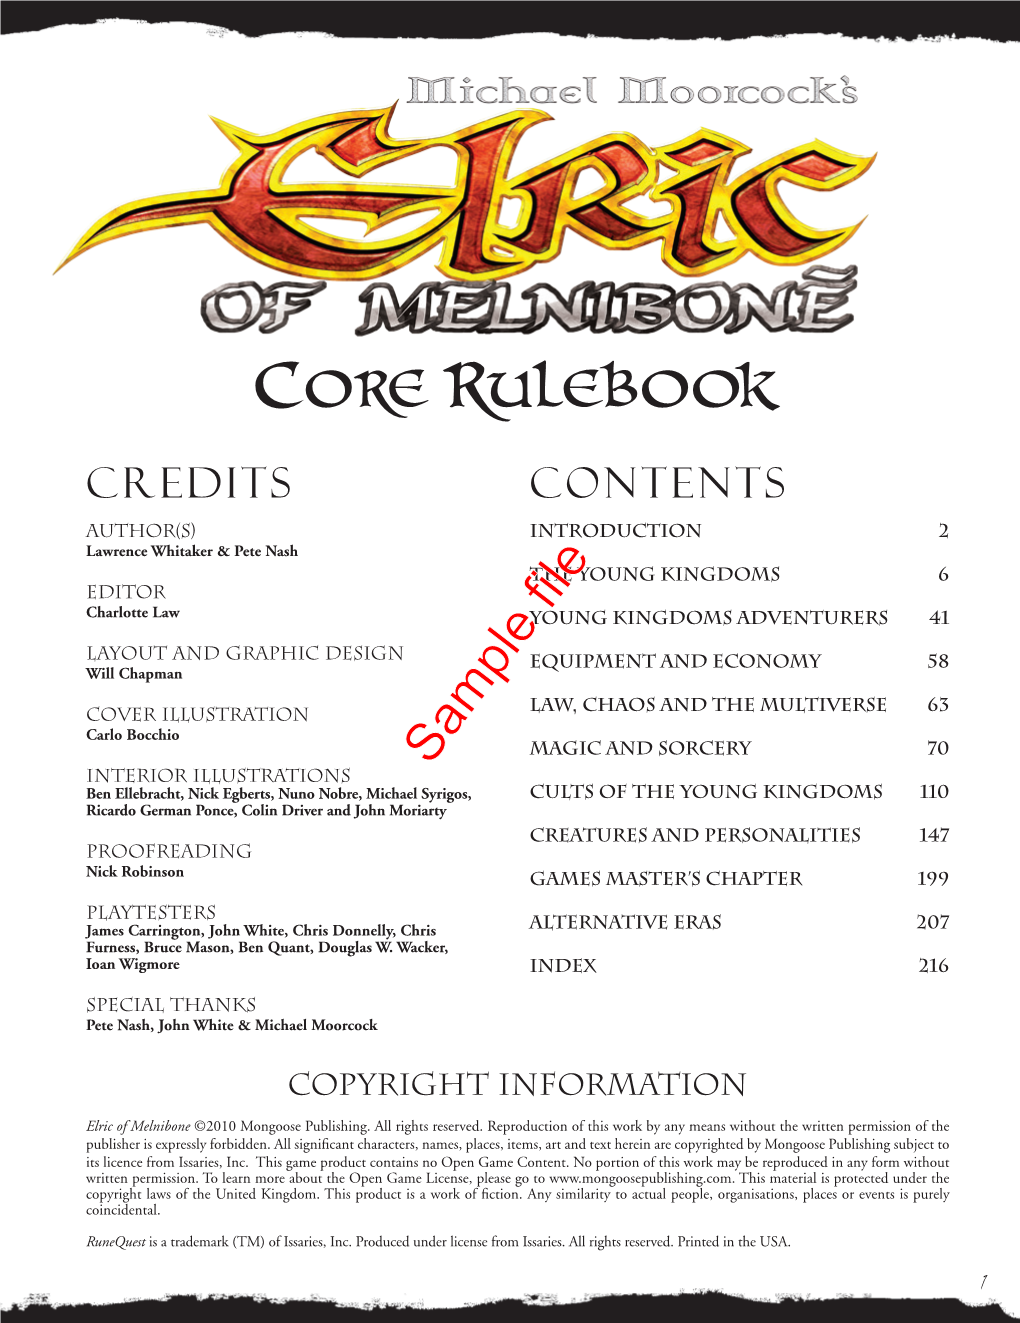 Core Rulebook Credits Contents Author(S) Introduction 2 Lawrence Whitaker & Pete Nash the Young Kingdoms 6 Editor Charlotte Law Young Kingdoms Adventurers 41